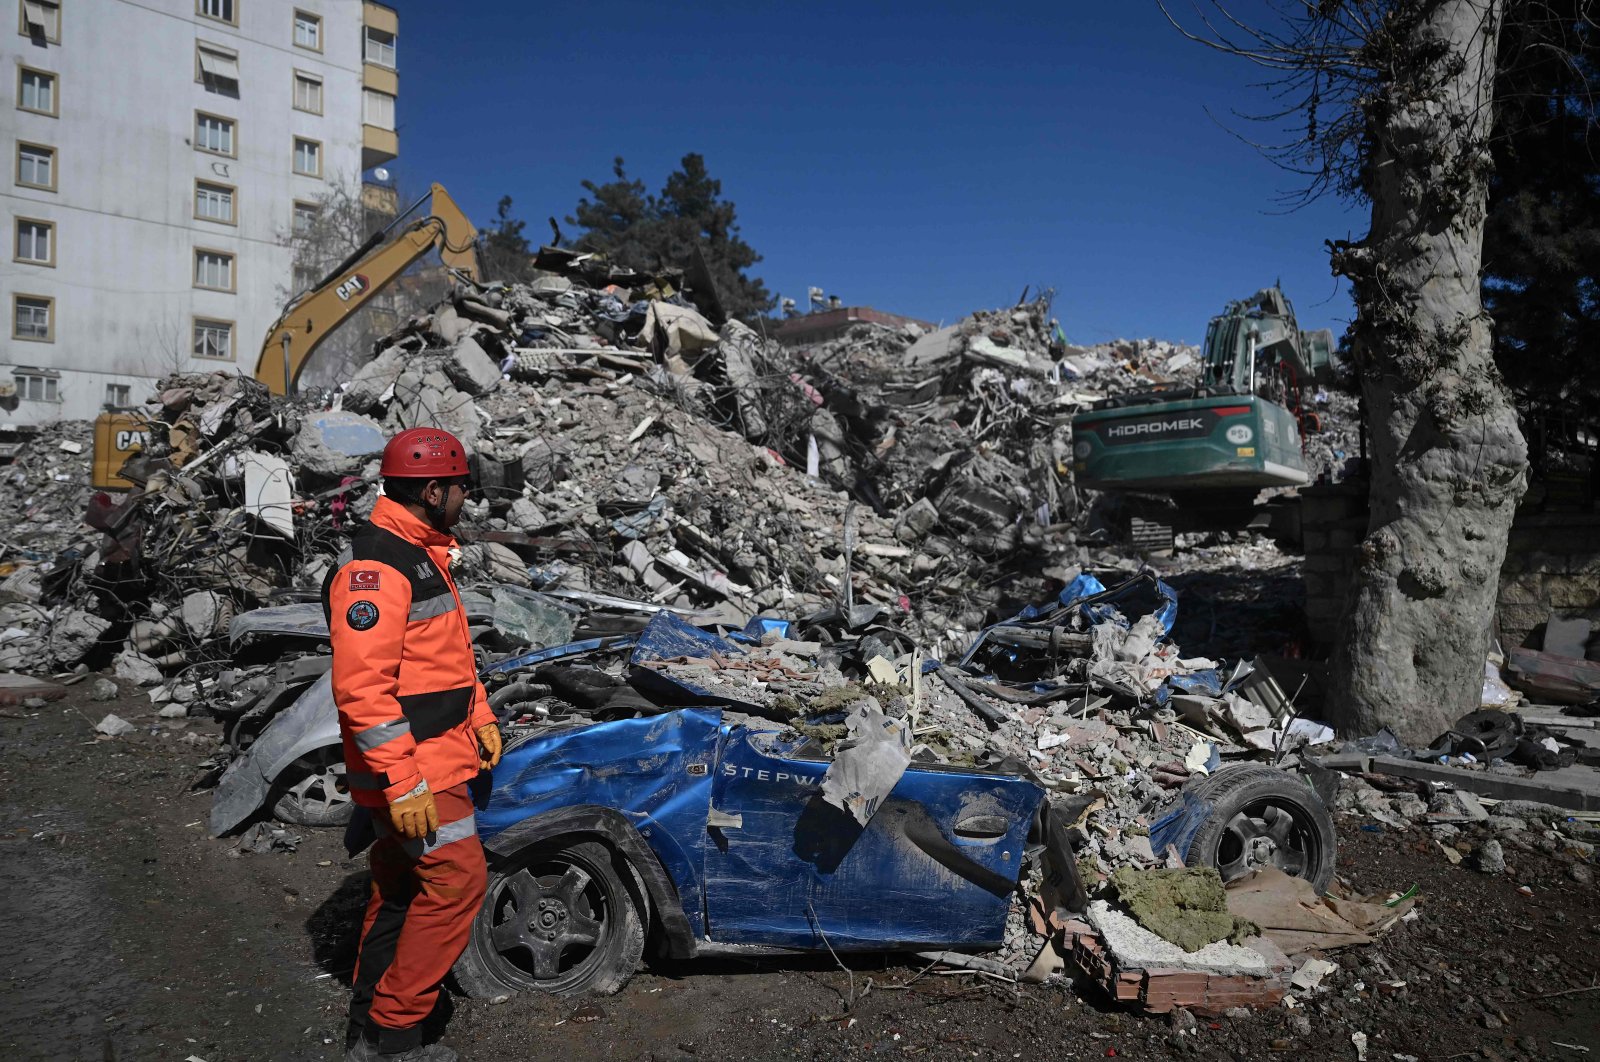 A rescuer stands in front of rubble near the site where Aleyna Ölmez, 17, was rescued from a collapsed building, 248 hours after the 7.7 magnitude earthquake struck parts of Türkiye and Syria, in Kahramanmaraş, Türkiye, Feb. 16, 2023. (AFP Photo)